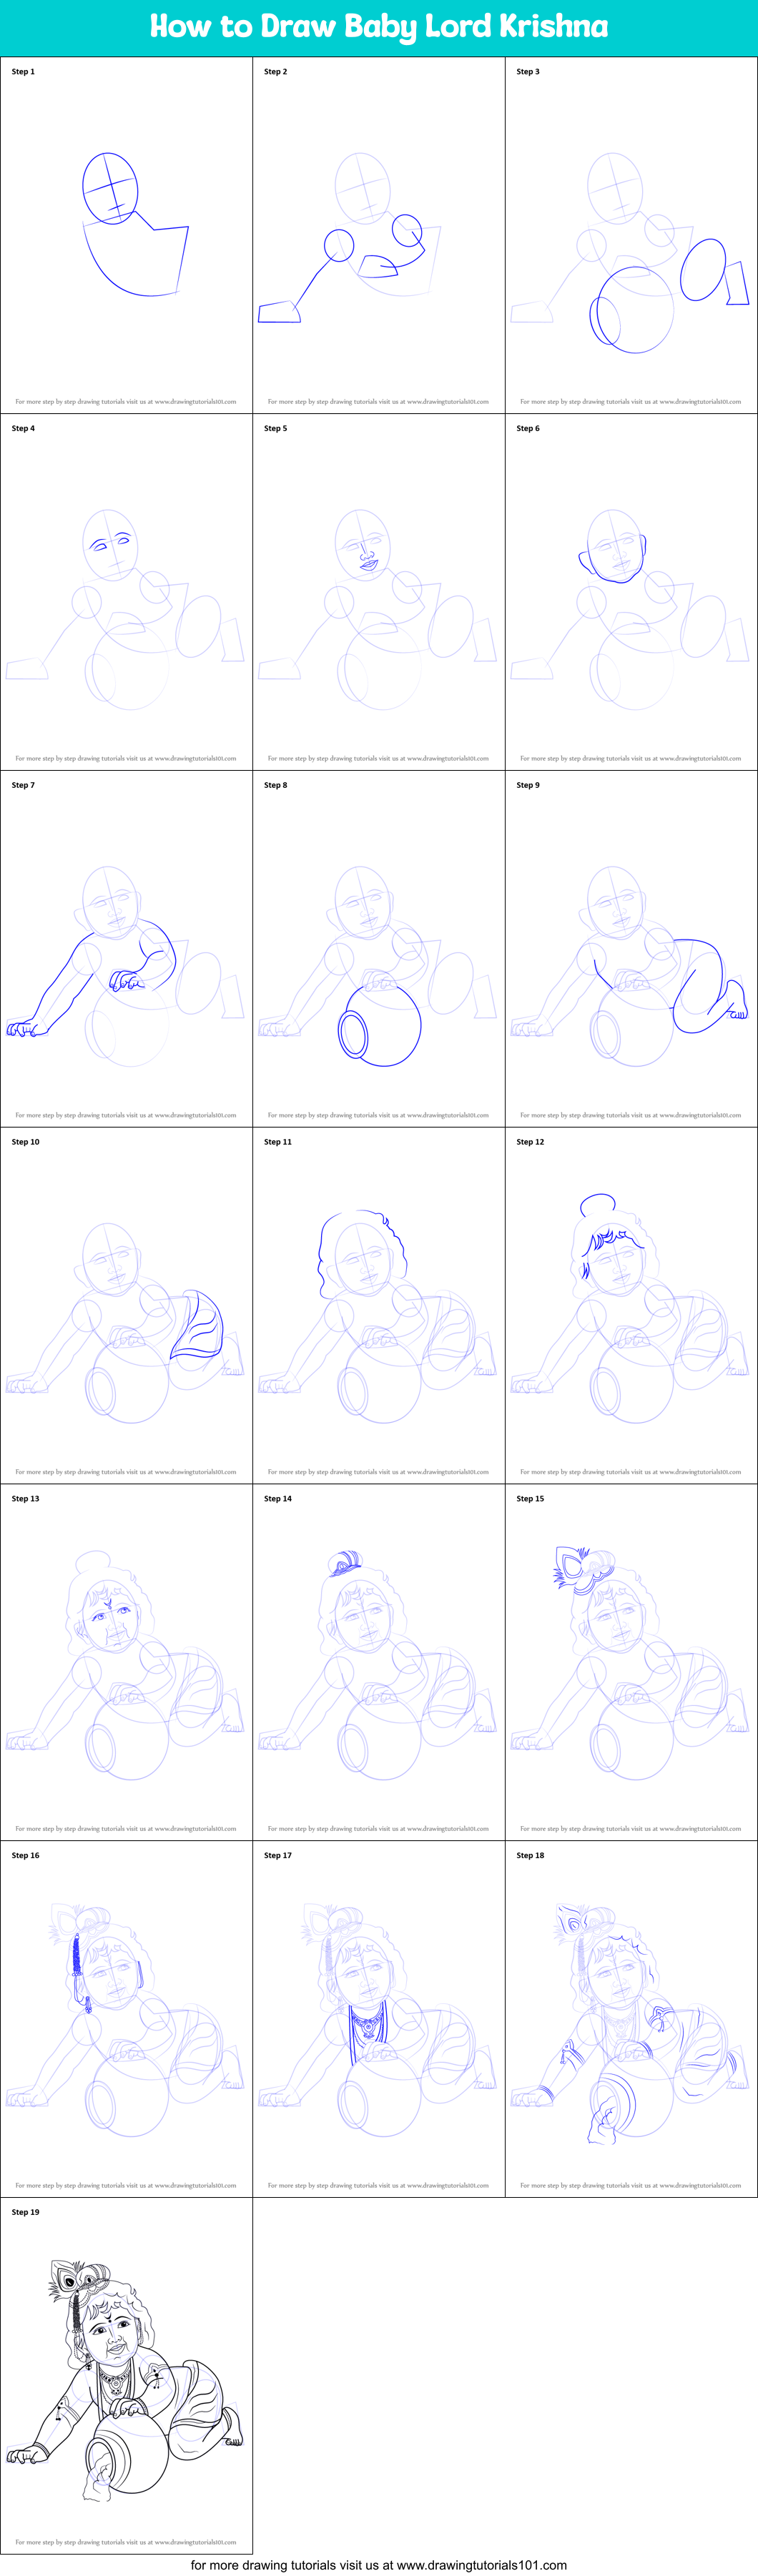 How to Draw Baby Lord Krishna printable step by step drawing sheet ...